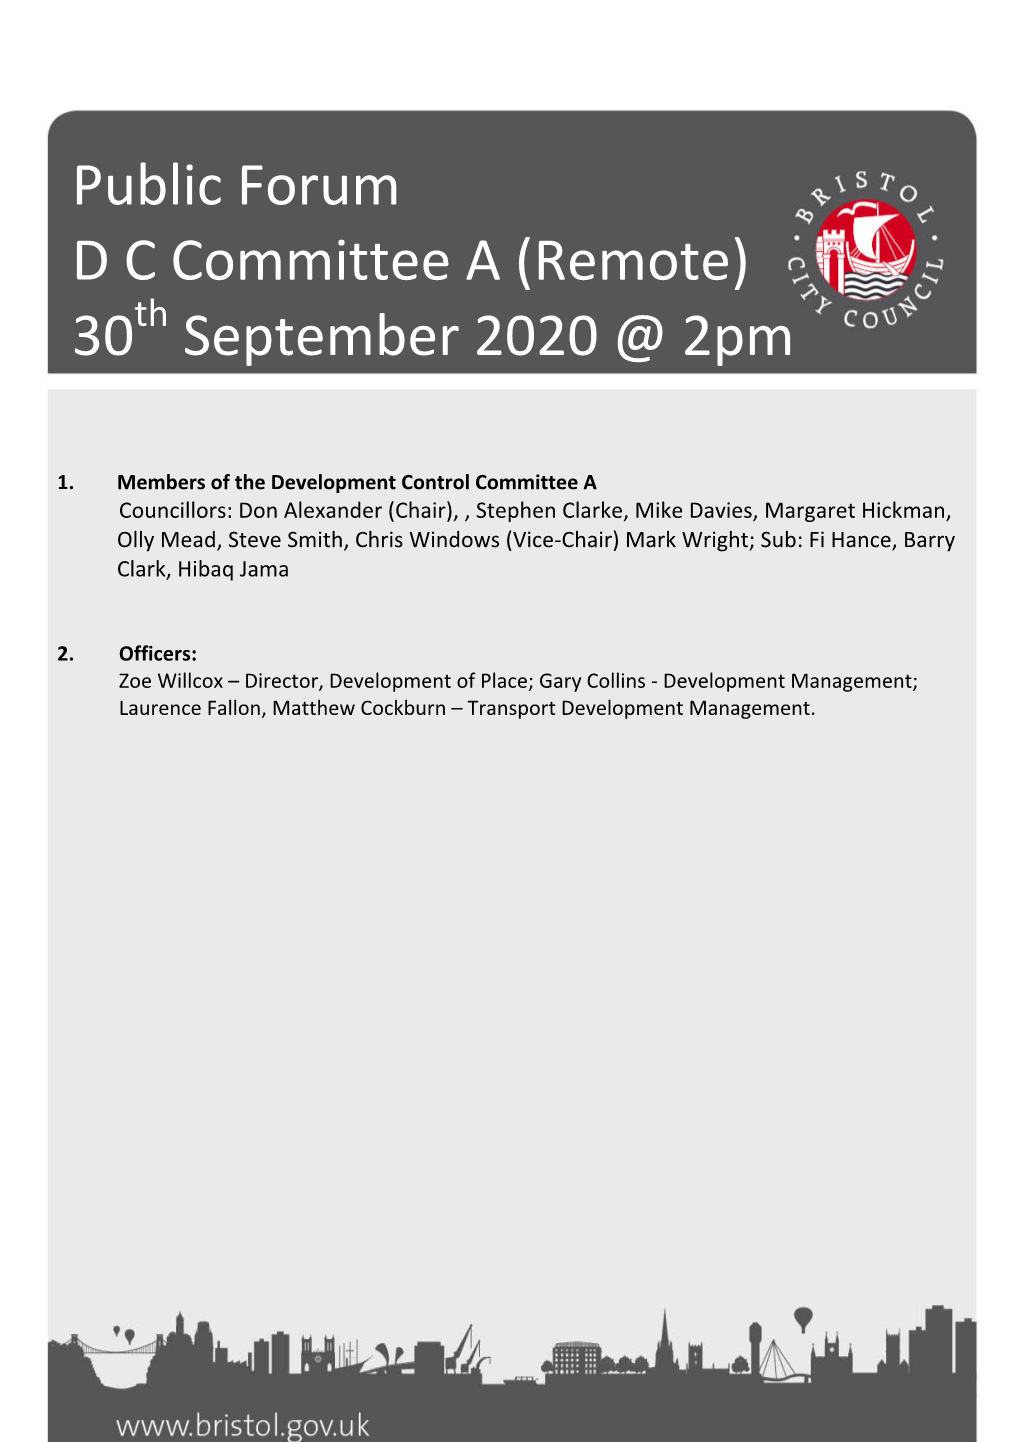 Public Forum D C Committee a (Remote) 30 September 2020 @